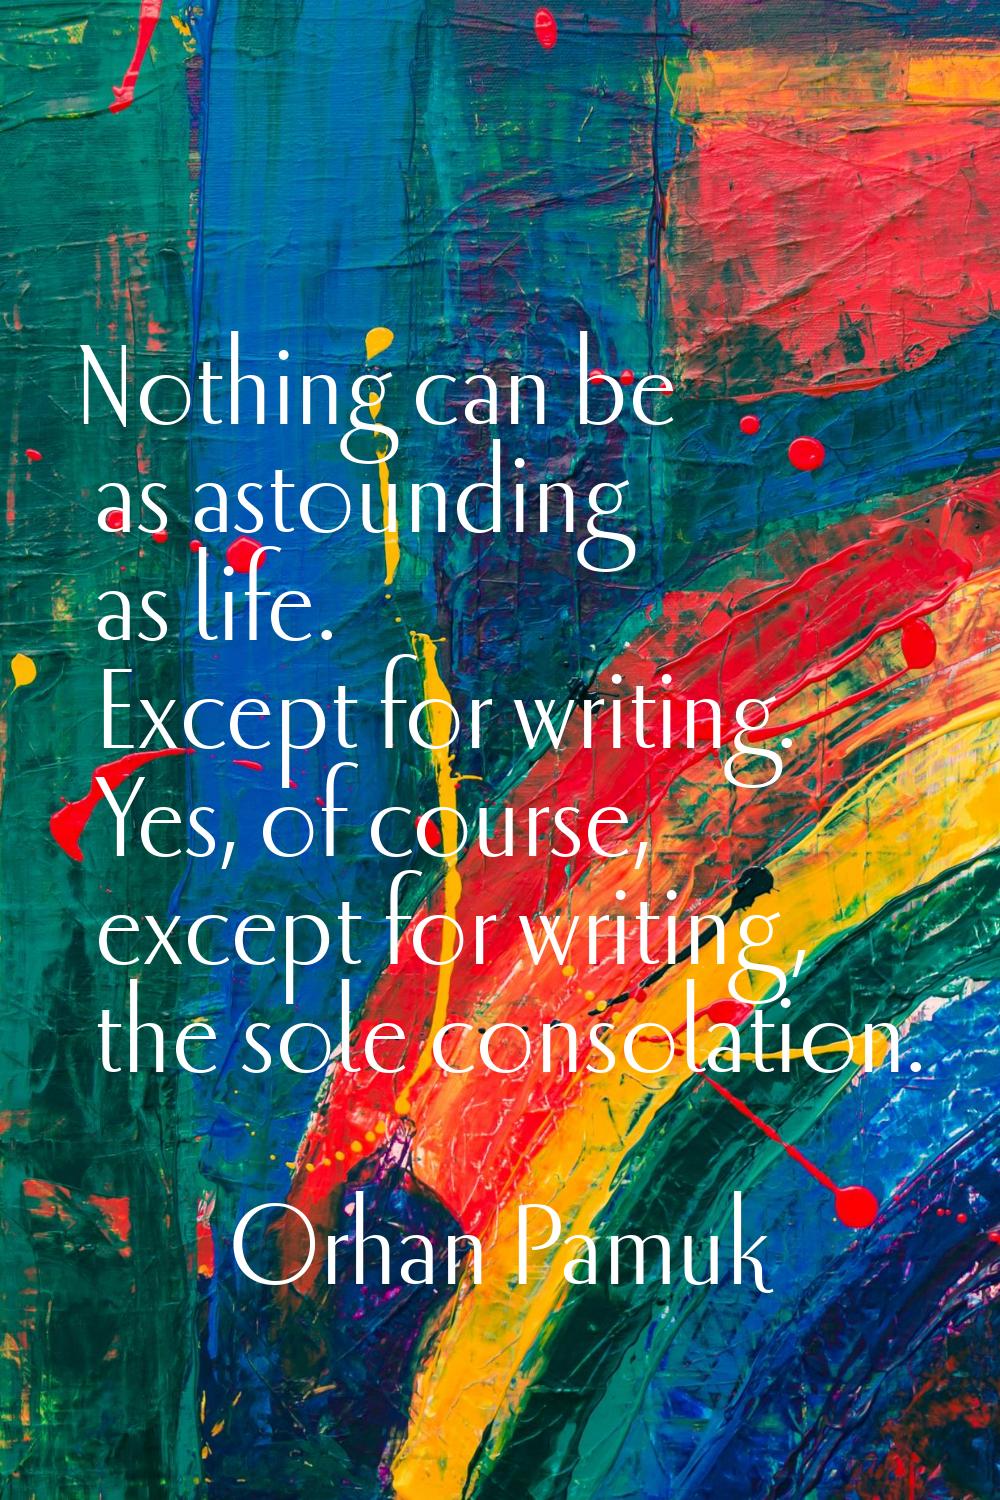 Nothing can be as astounding as life. Except for writing. Yes, of course, except for writing, the s